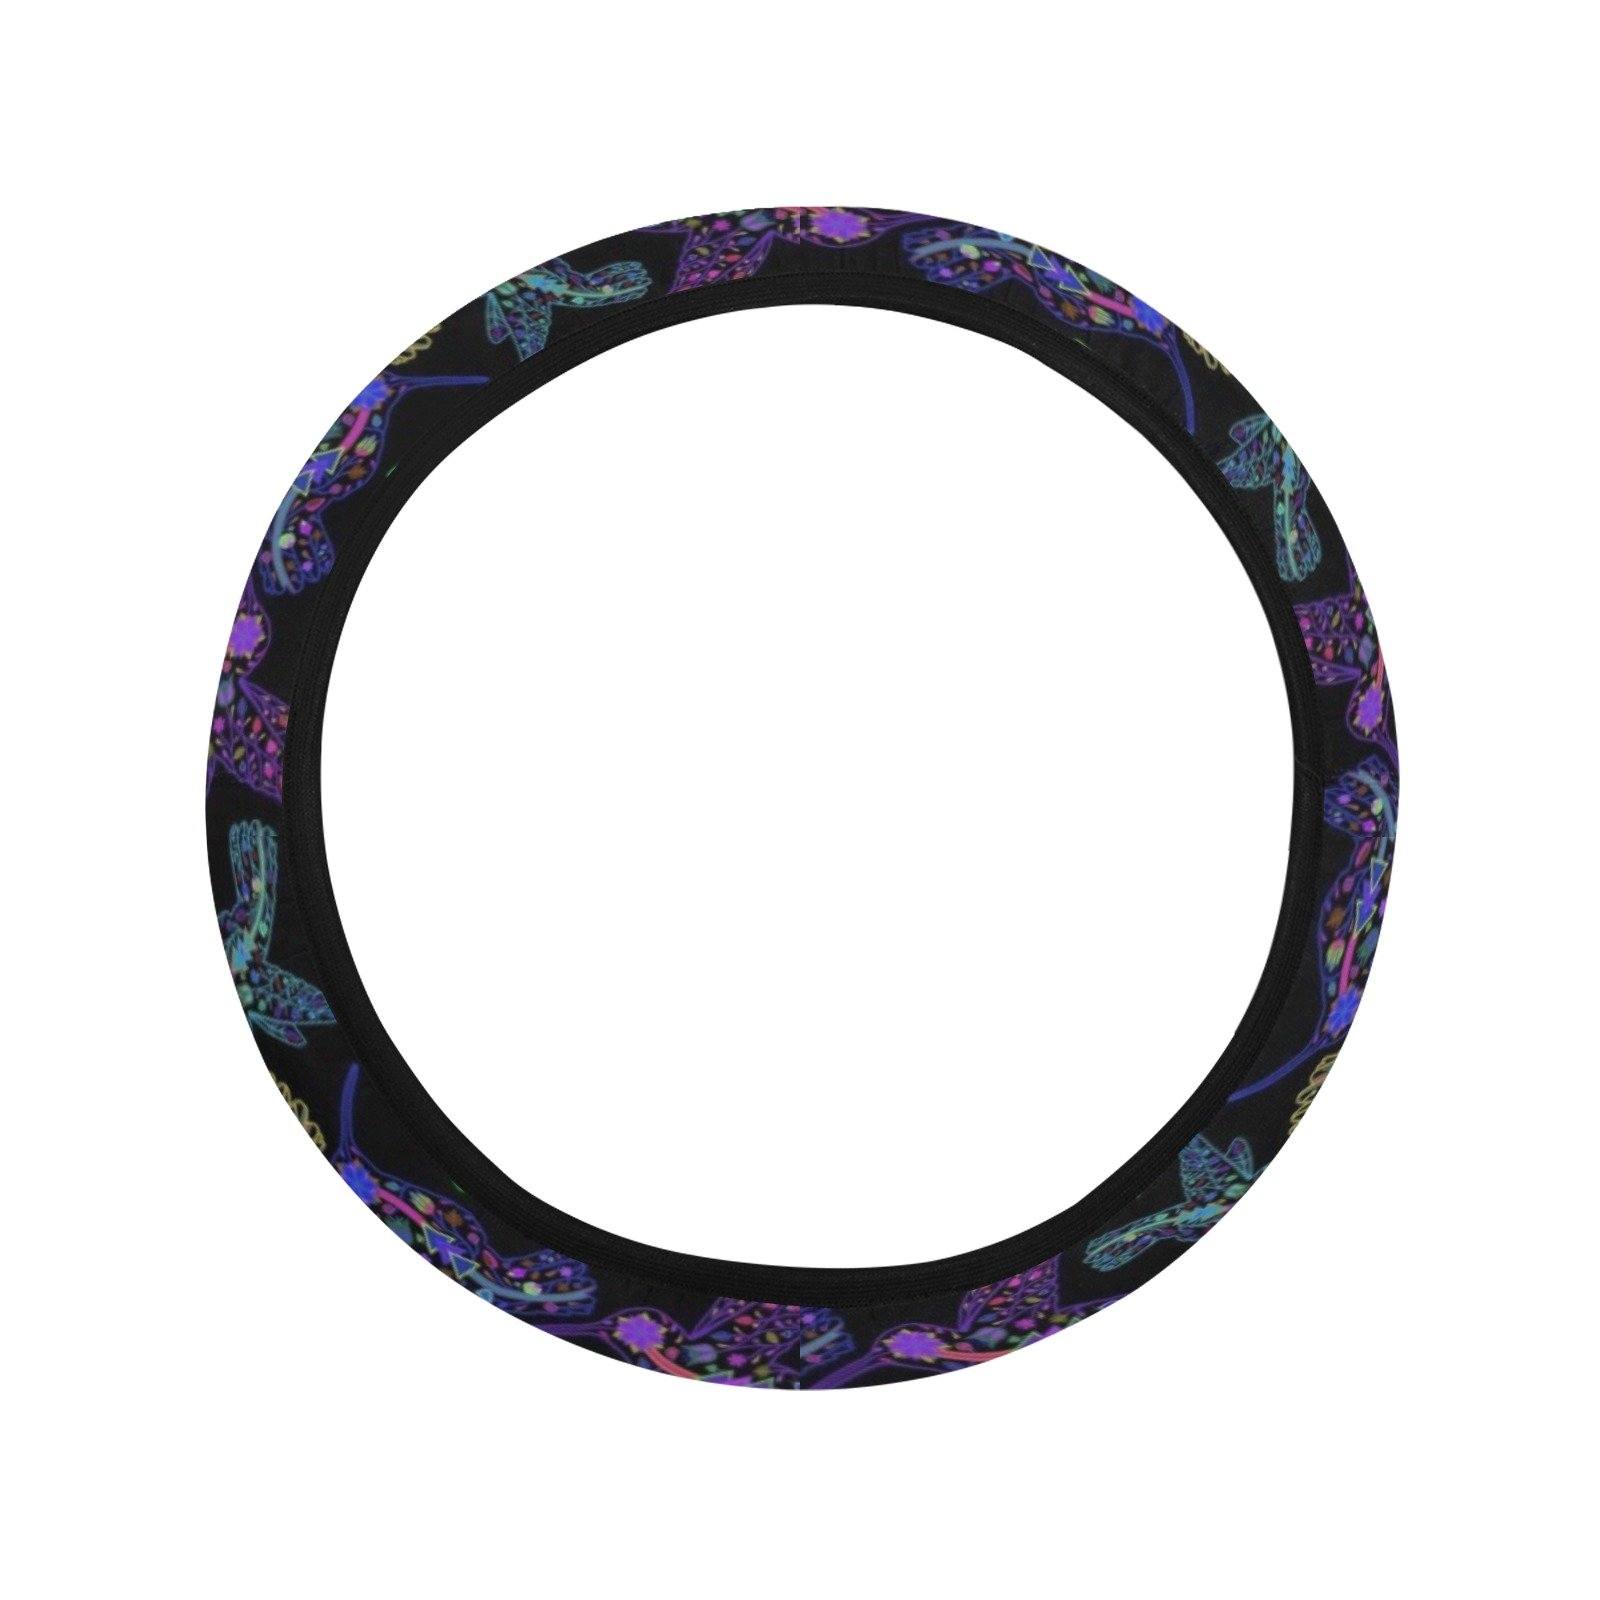 Floral Hummingbird Steering Wheel Cover with Elastic Edge Steering Wheel Cover with Elastic Edge e-joyer 